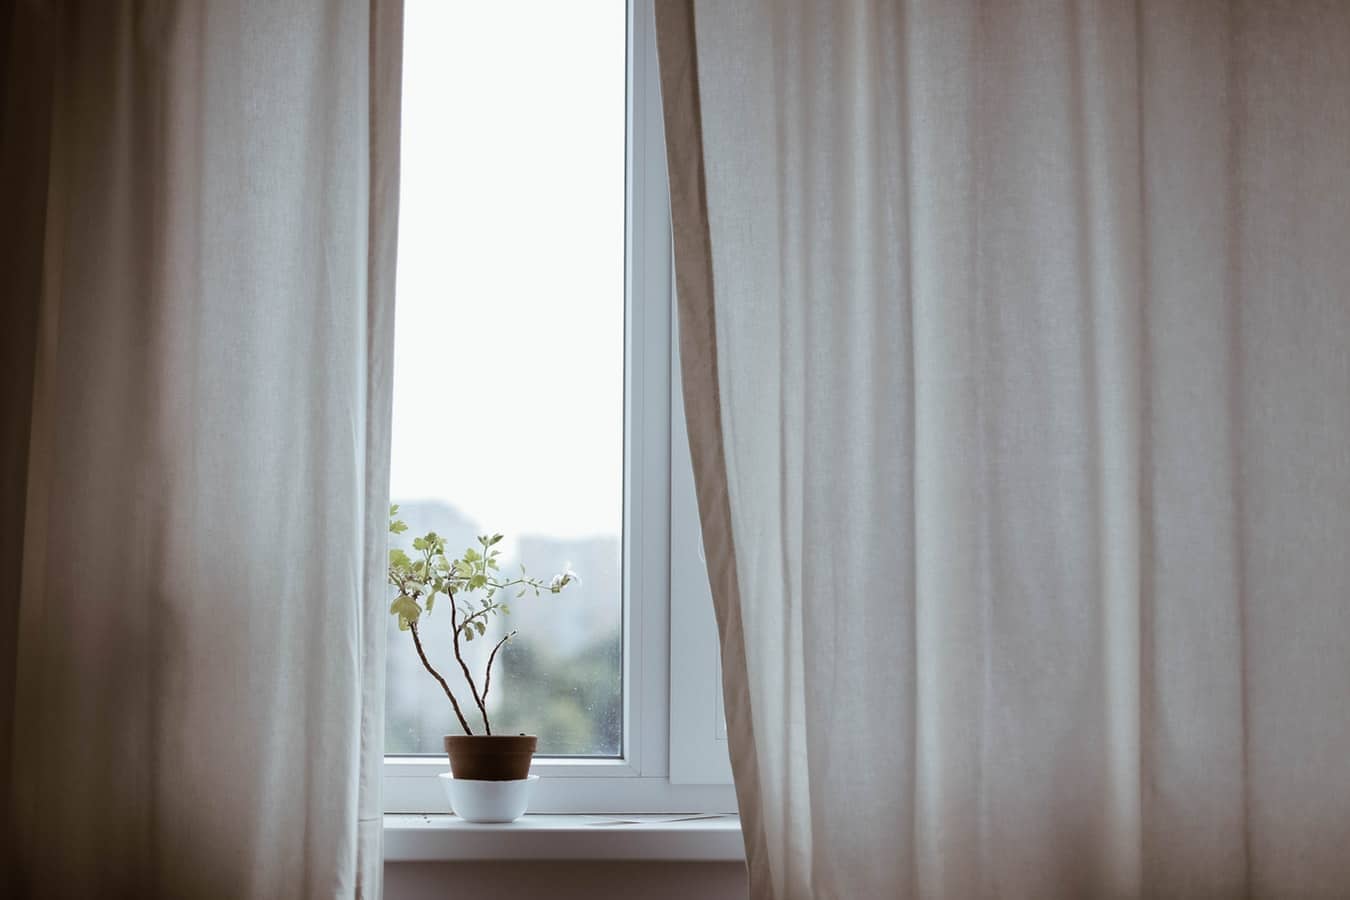 Window with plant on the sill